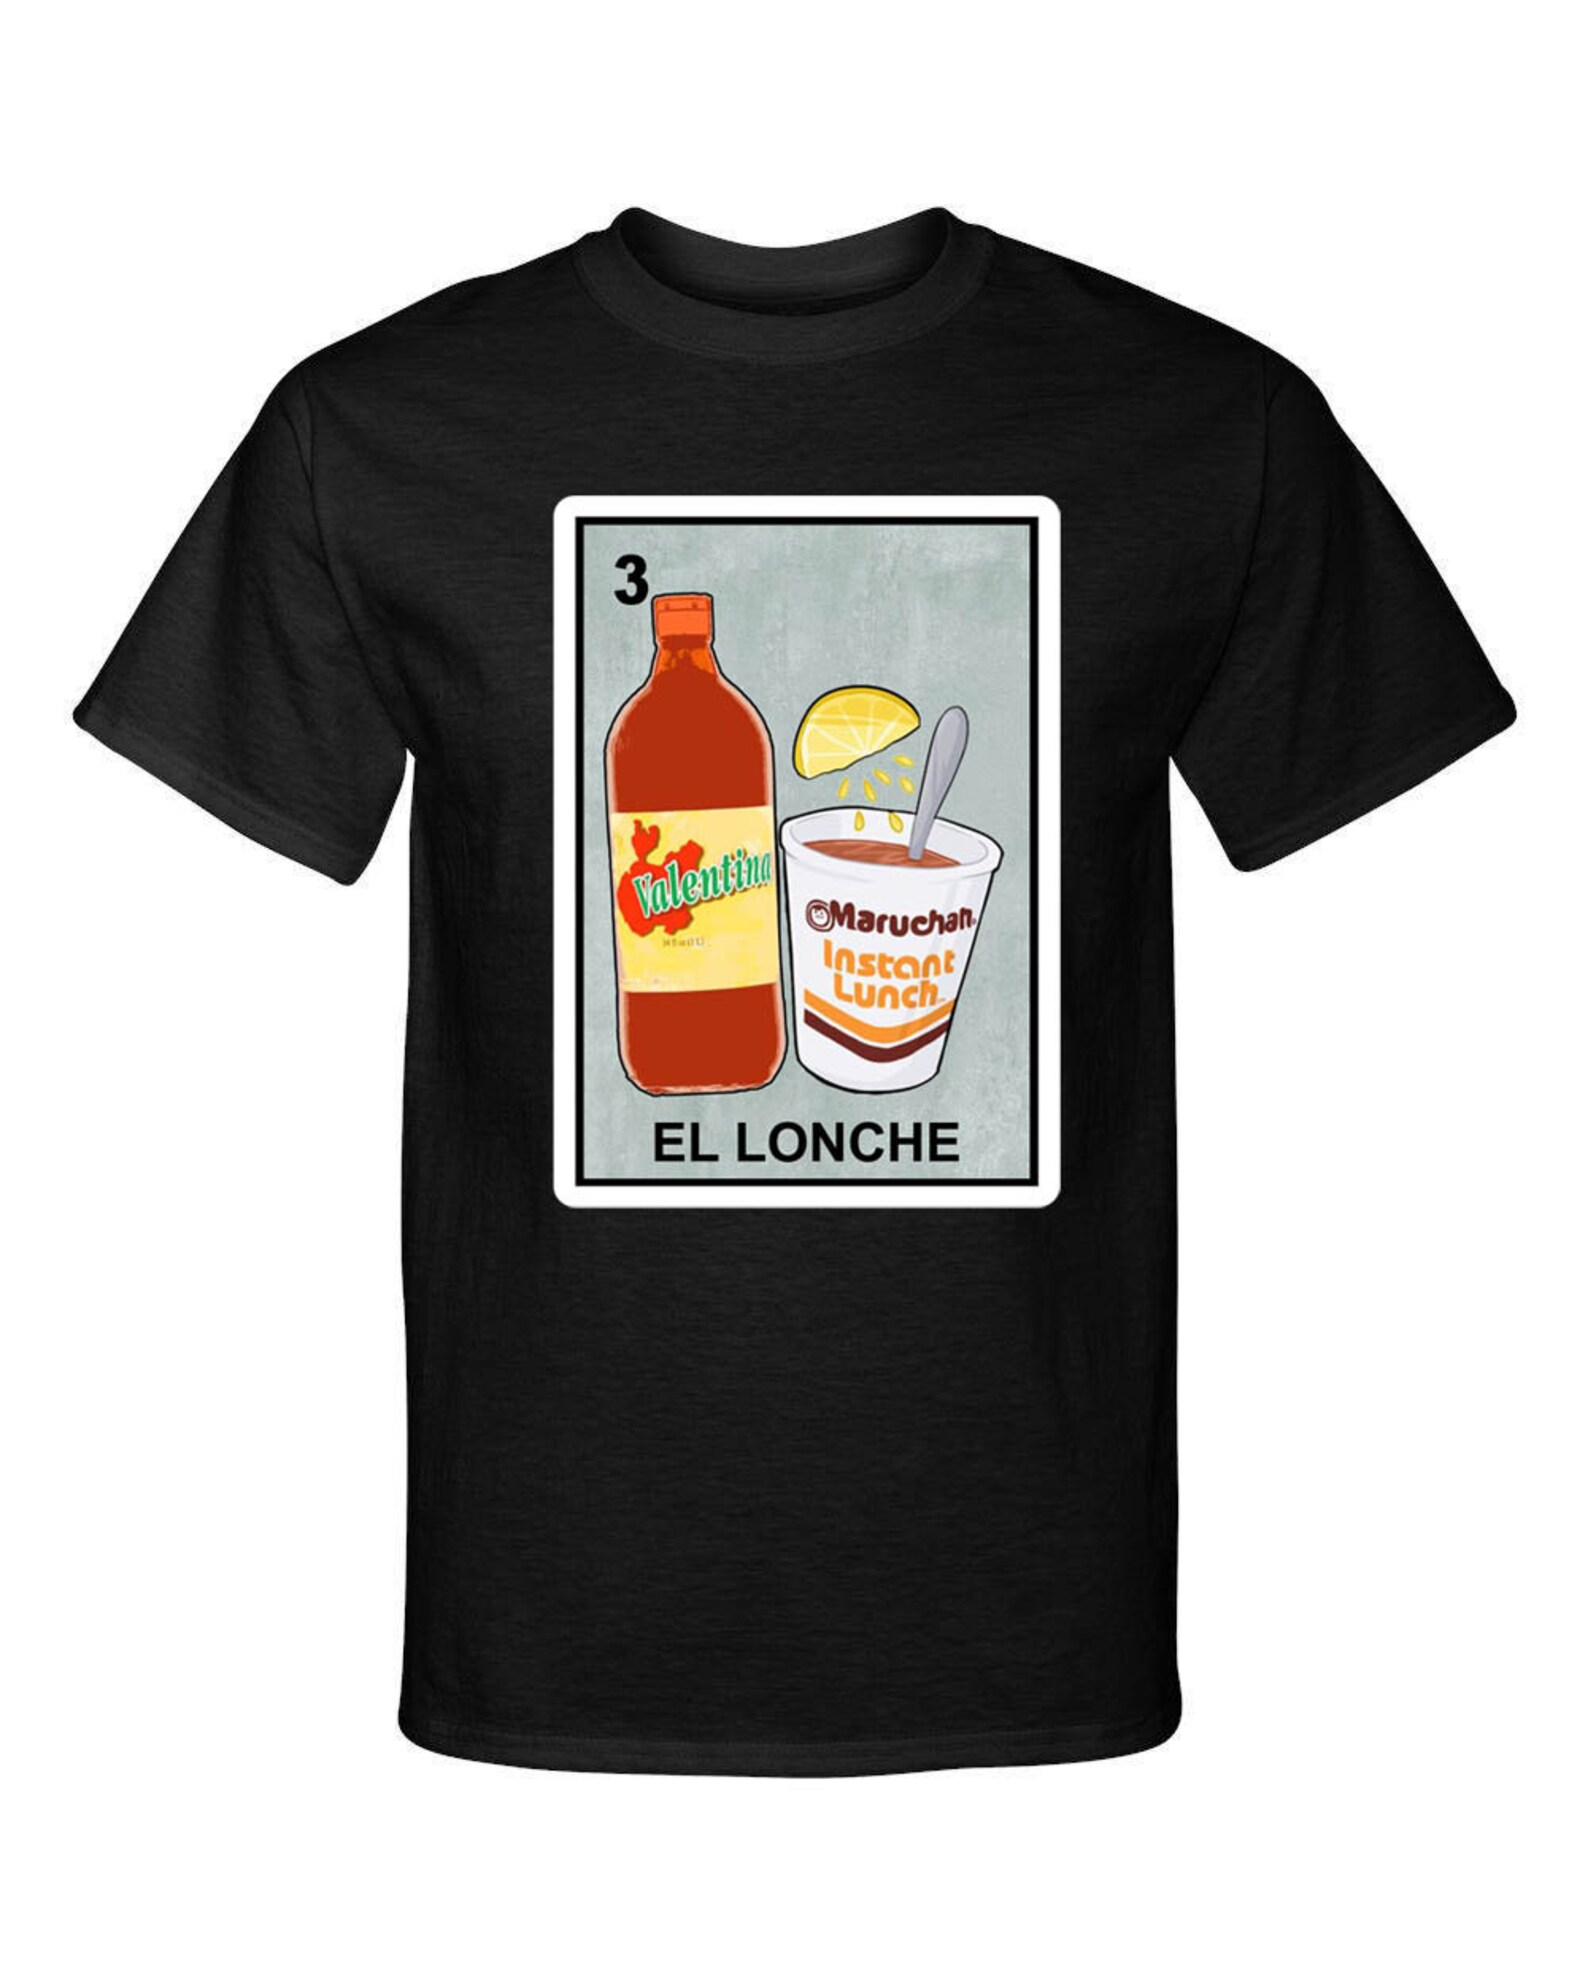 El Lonche the Lunch Hot Sauce Valentina Sopa Soup Loteria - Etsy